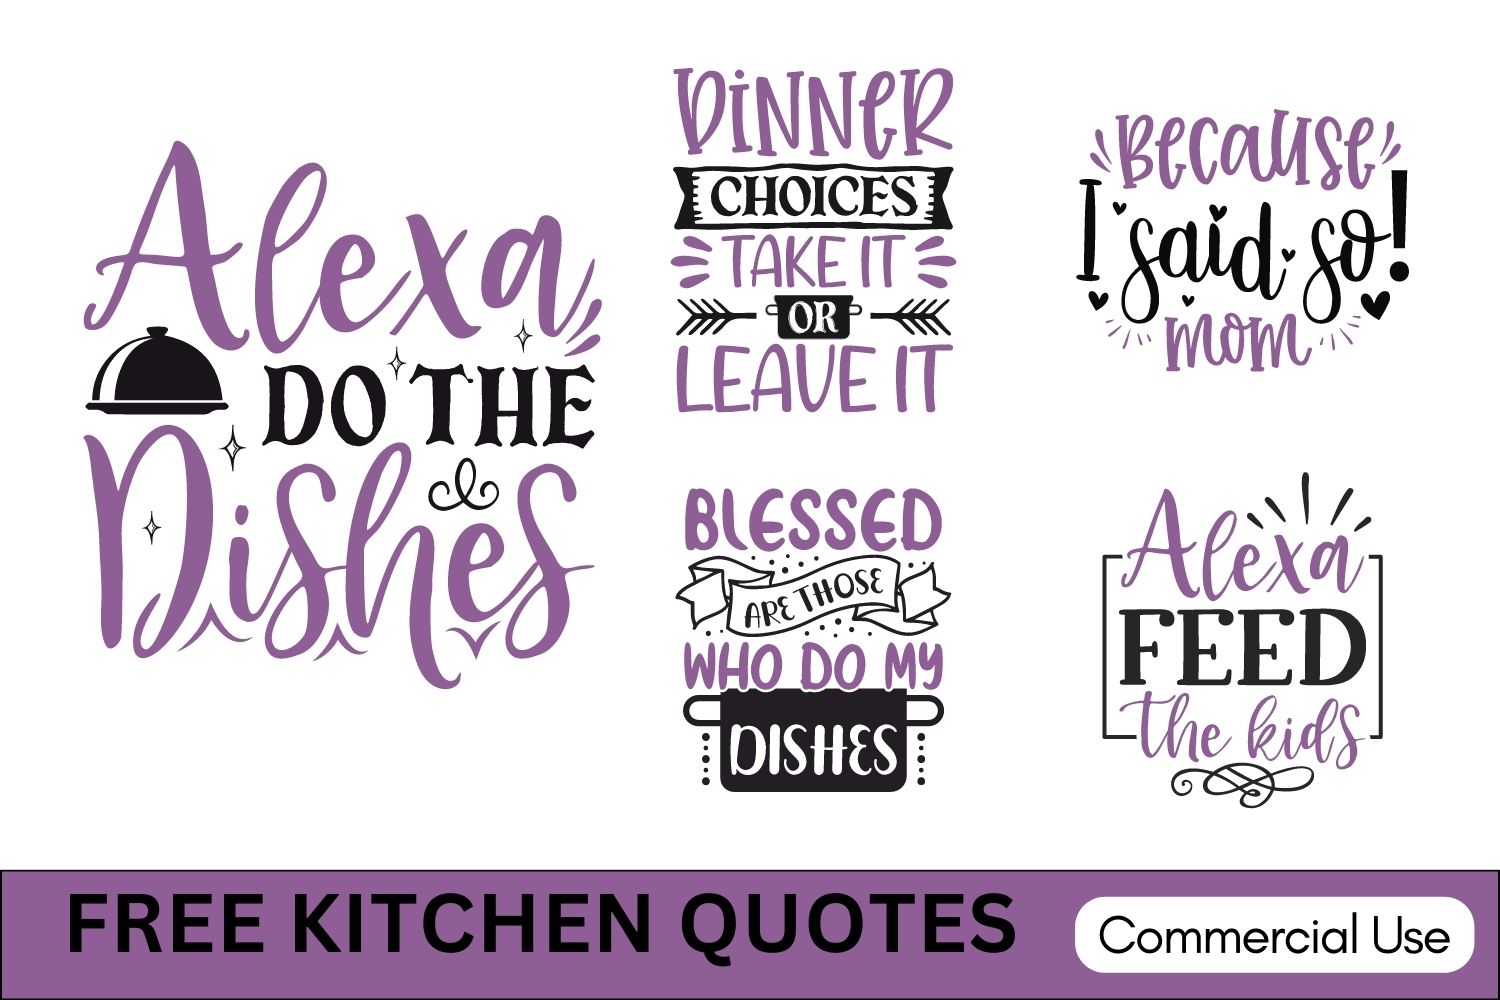 Friendship Quotes & Sayings (Free Clipart & SVG Files) – DIY Projects,  Patterns, Monograms, Designs, Templates